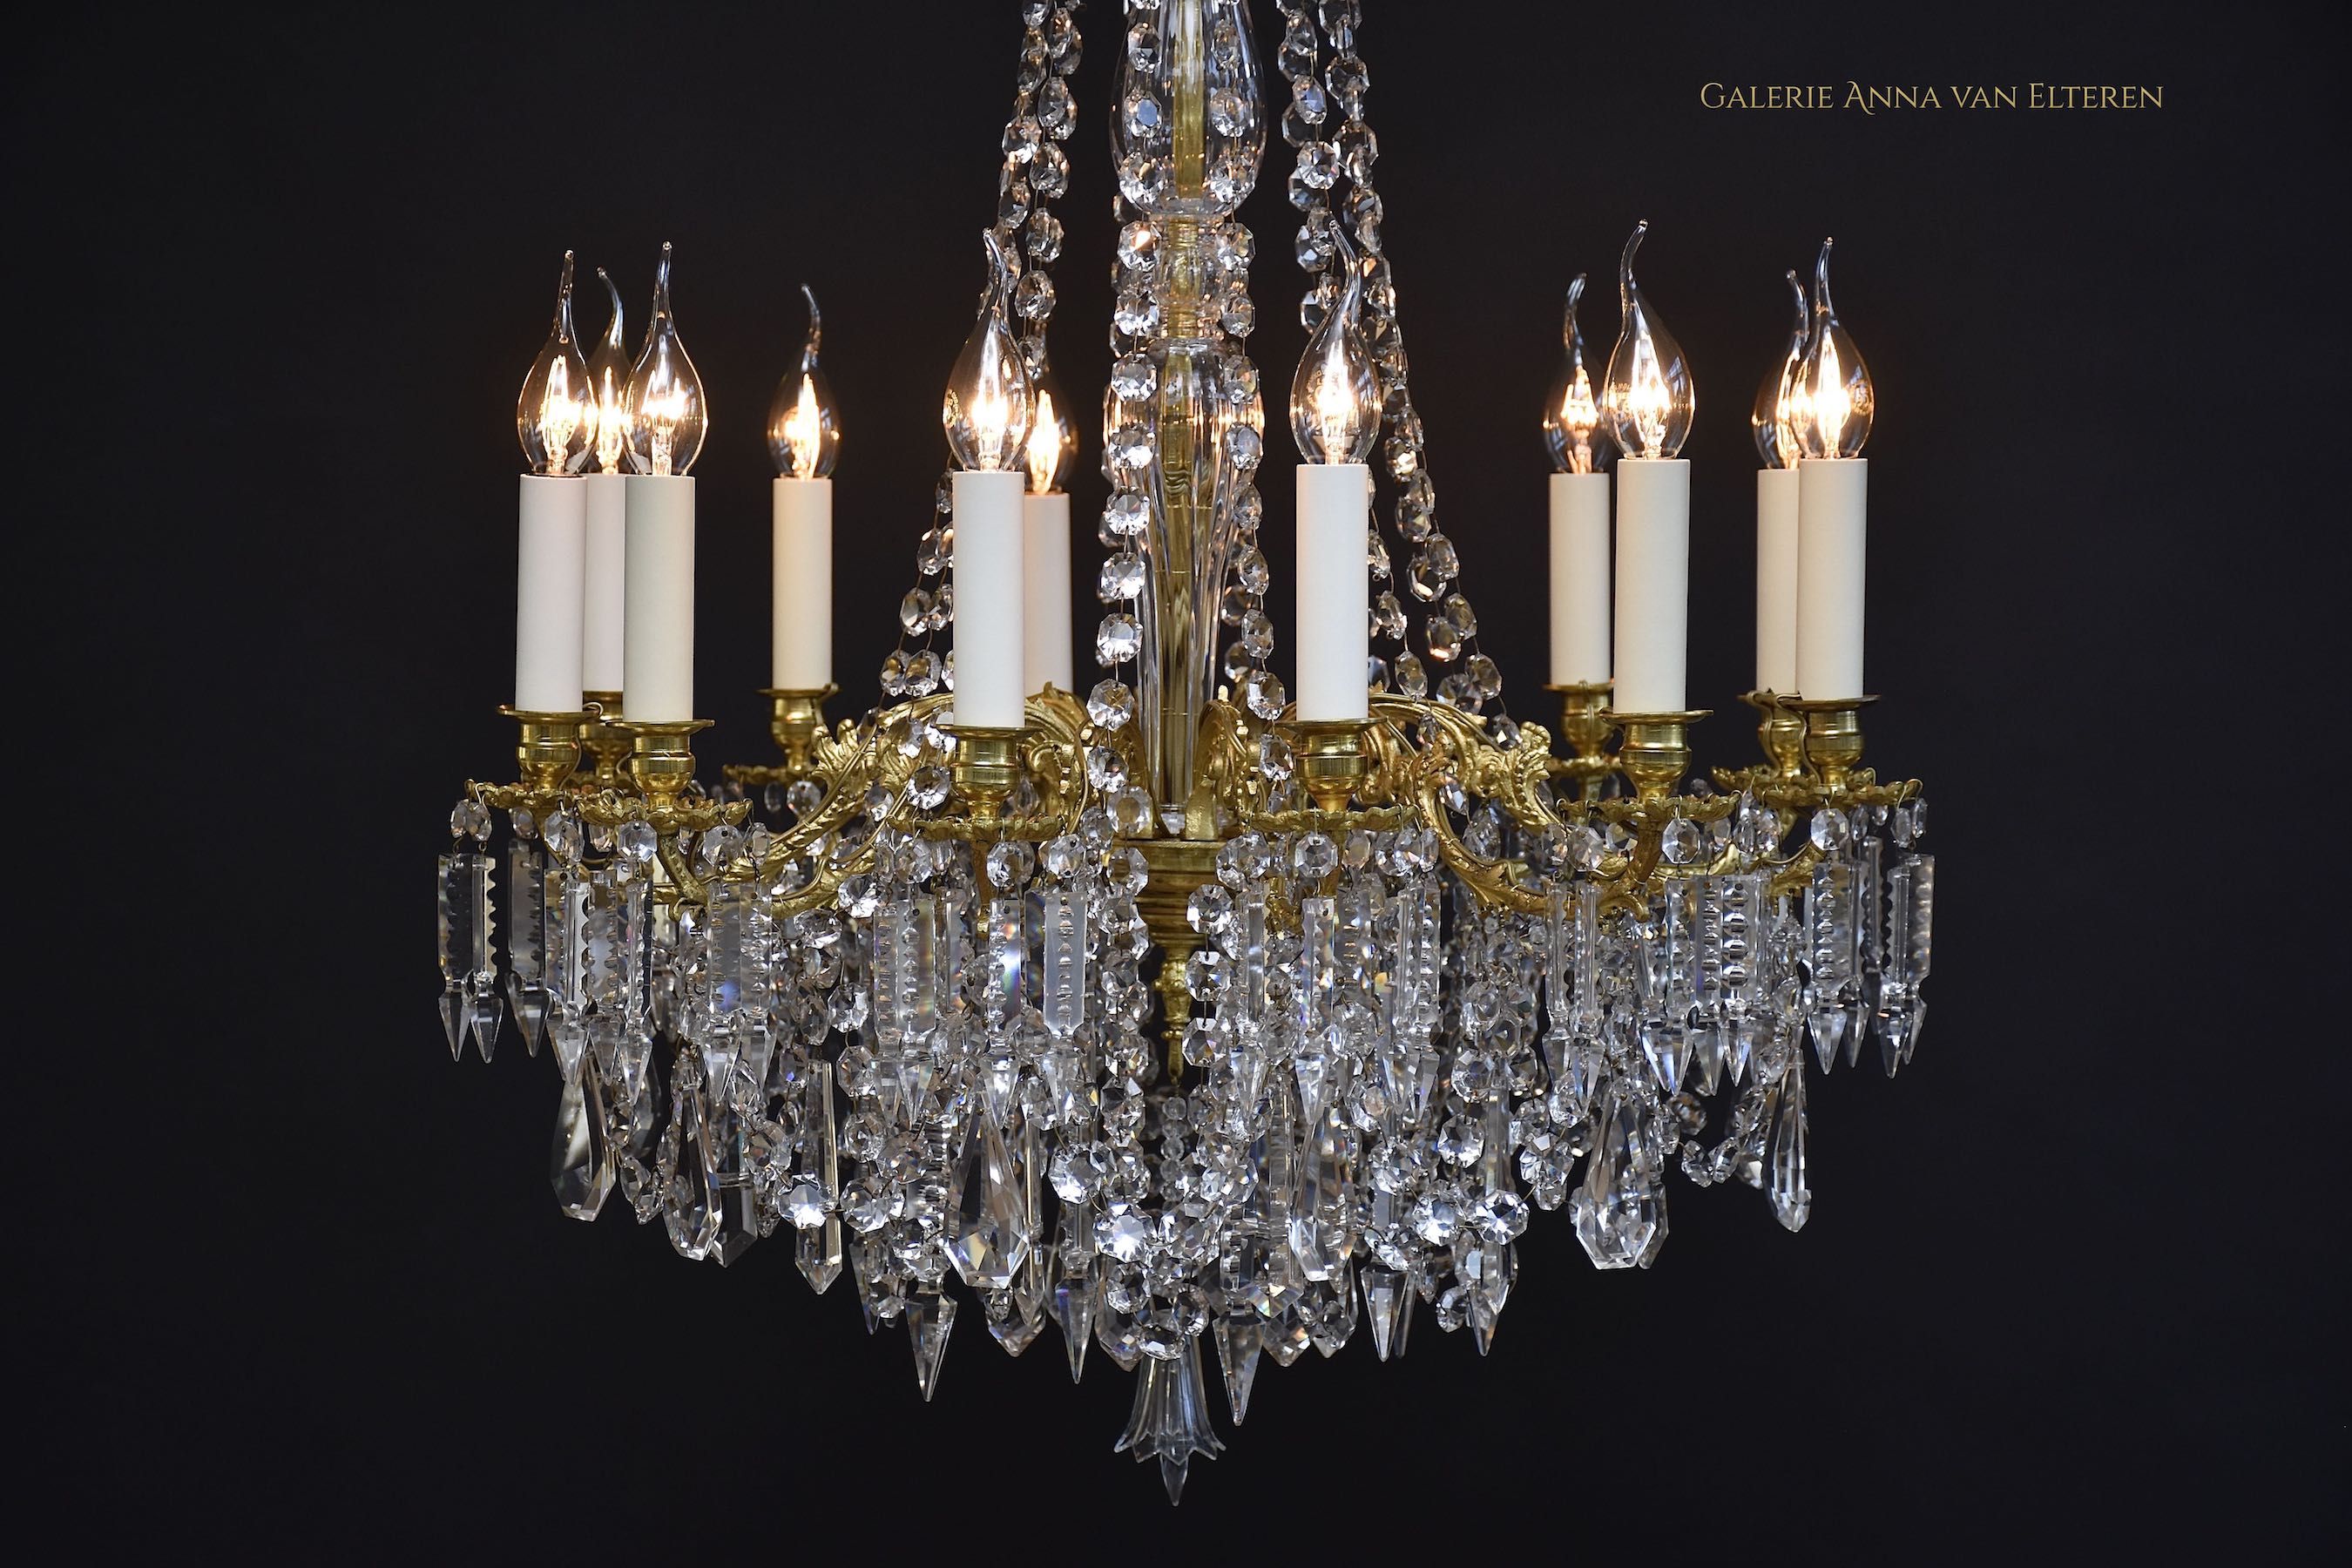 Gilt bronze Baccarat chandelier in the style of Louis XVI